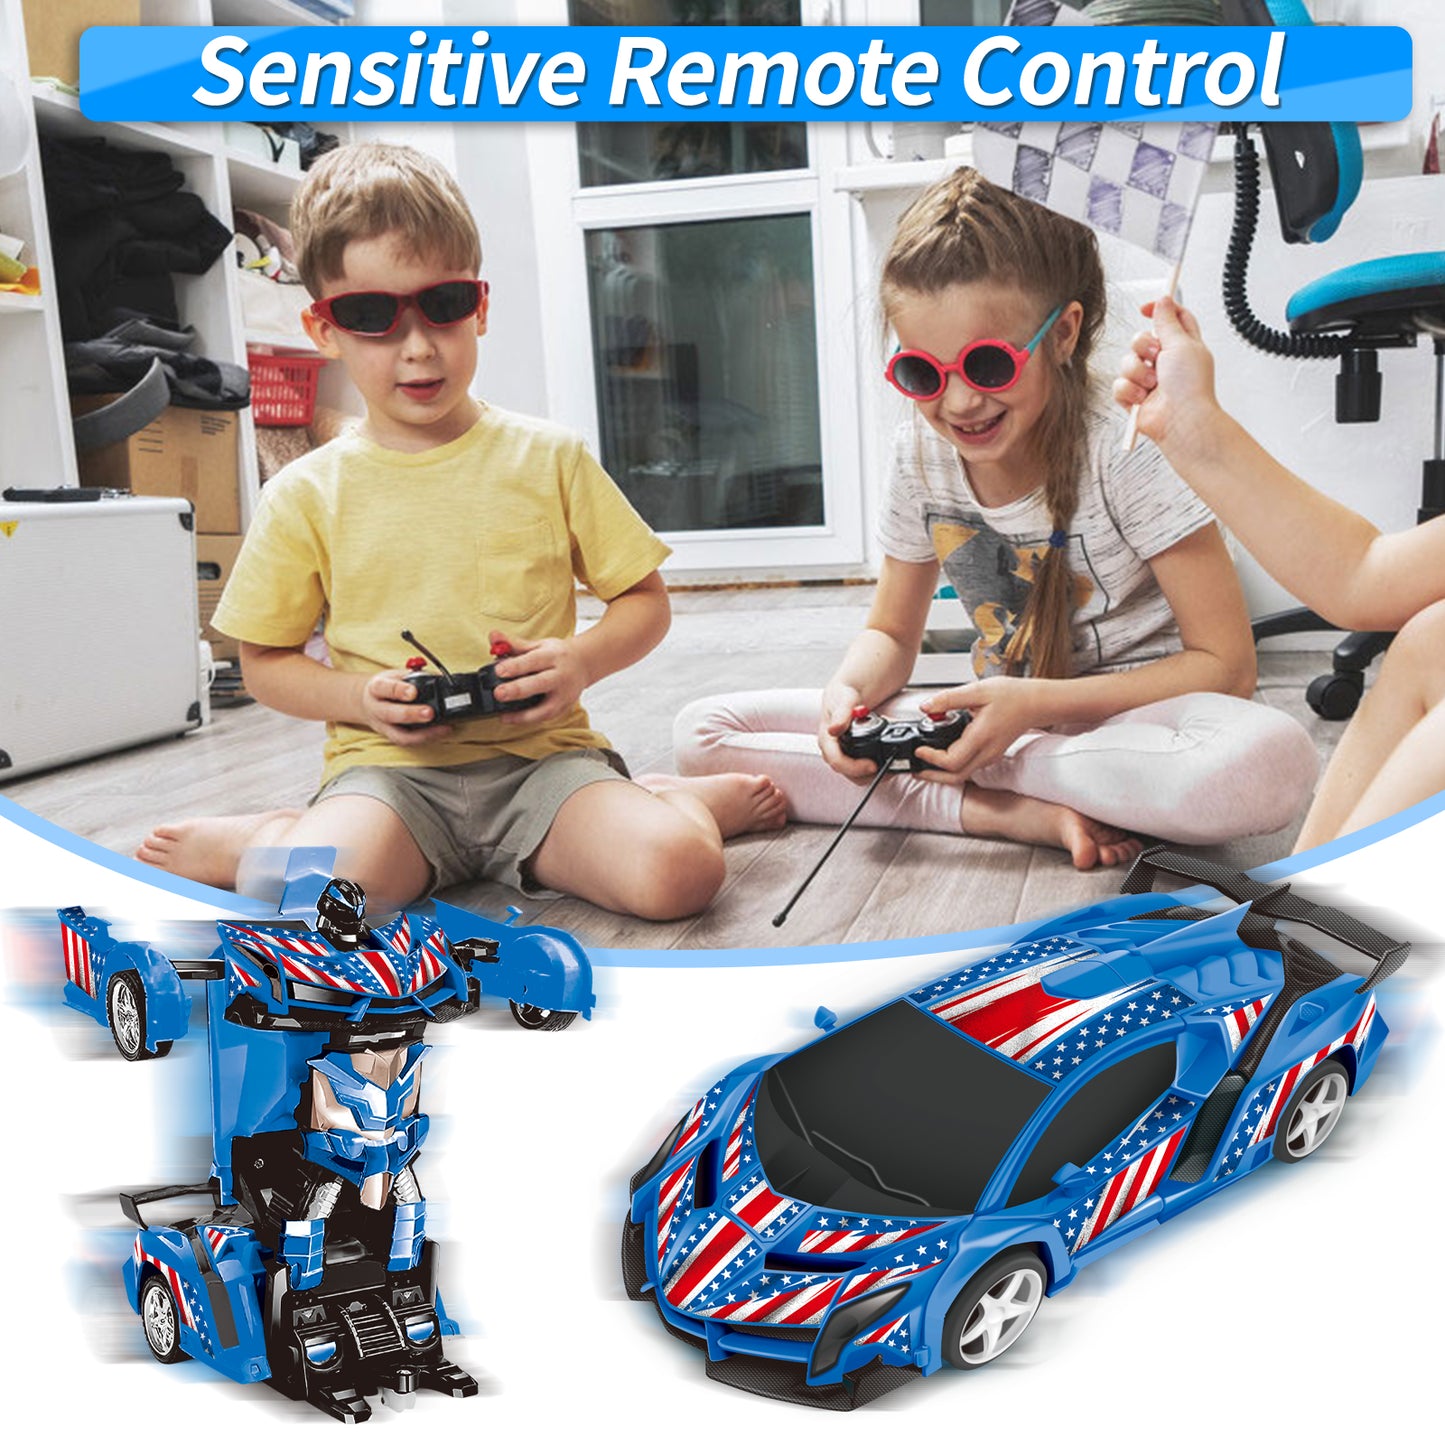 Remote Control Car Transform Car Robot Toy for Kids,1:18 Scale High Speed RC Cars Racing Car with 360°Rotating for Boys 3 4 5 6 7 8 9 Years Old Birthday